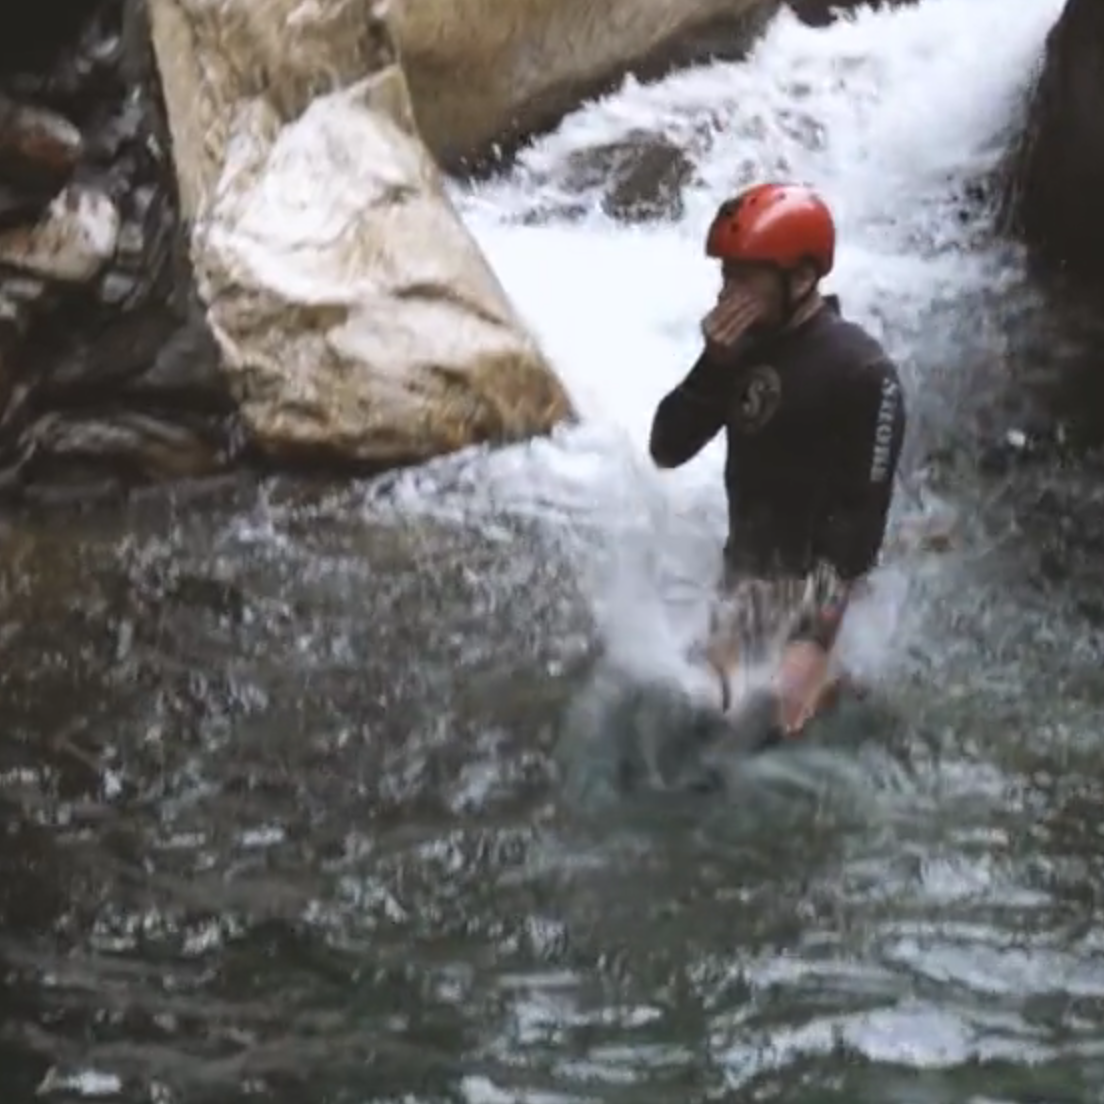 Canyoning in Val Bodengo